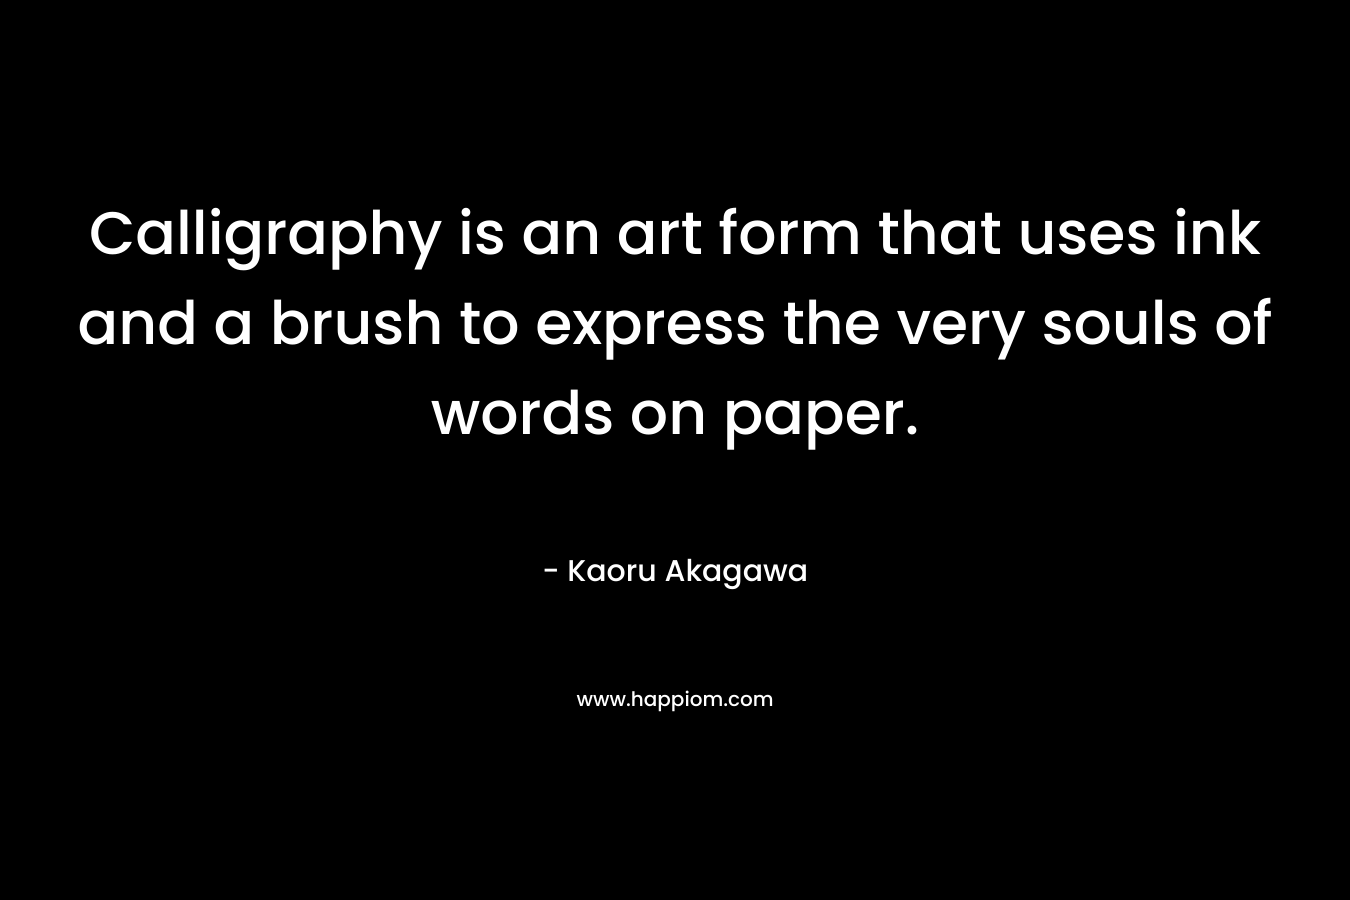 Calligraphy is an art form that uses ink and a brush to express the very souls of words on paper. – Kaoru Akagawa